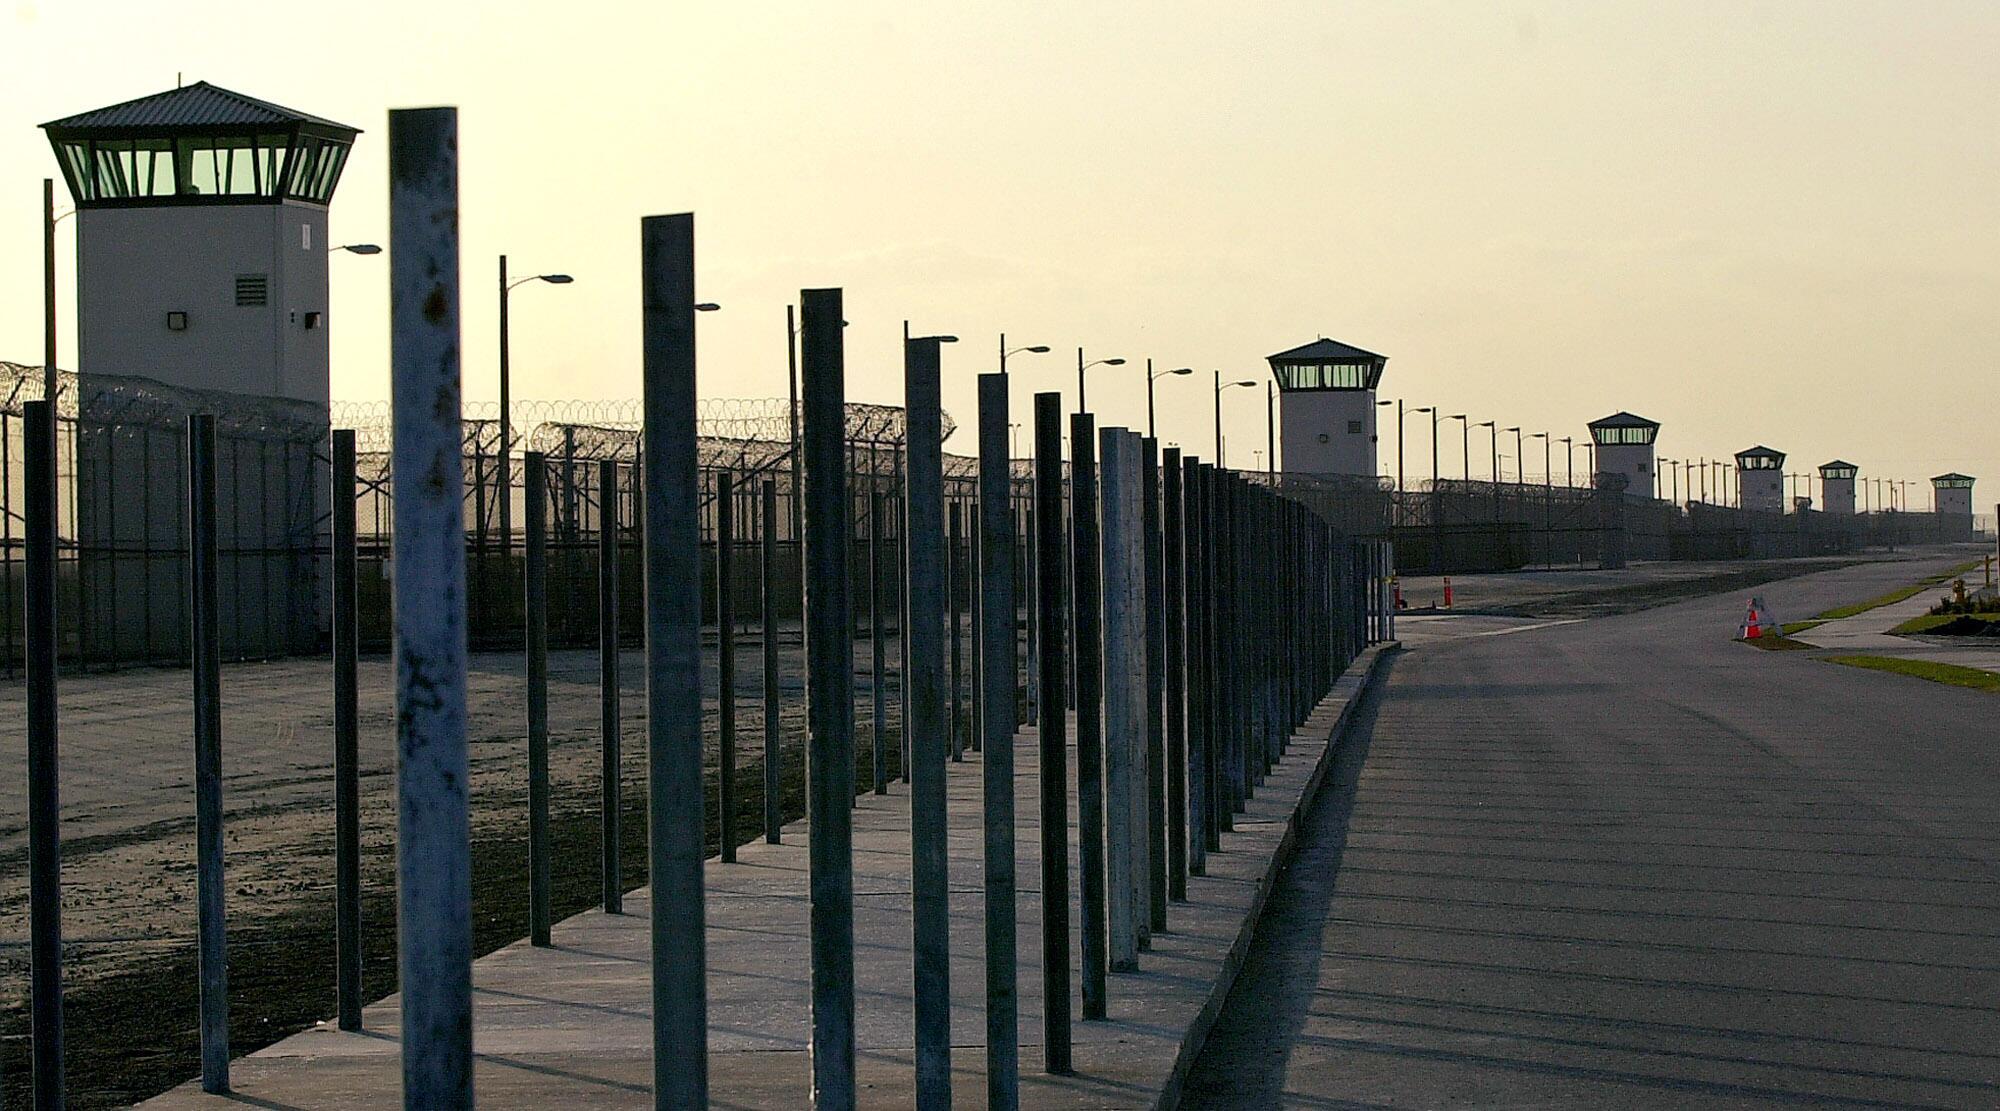 A fence runs along a long line of towers.